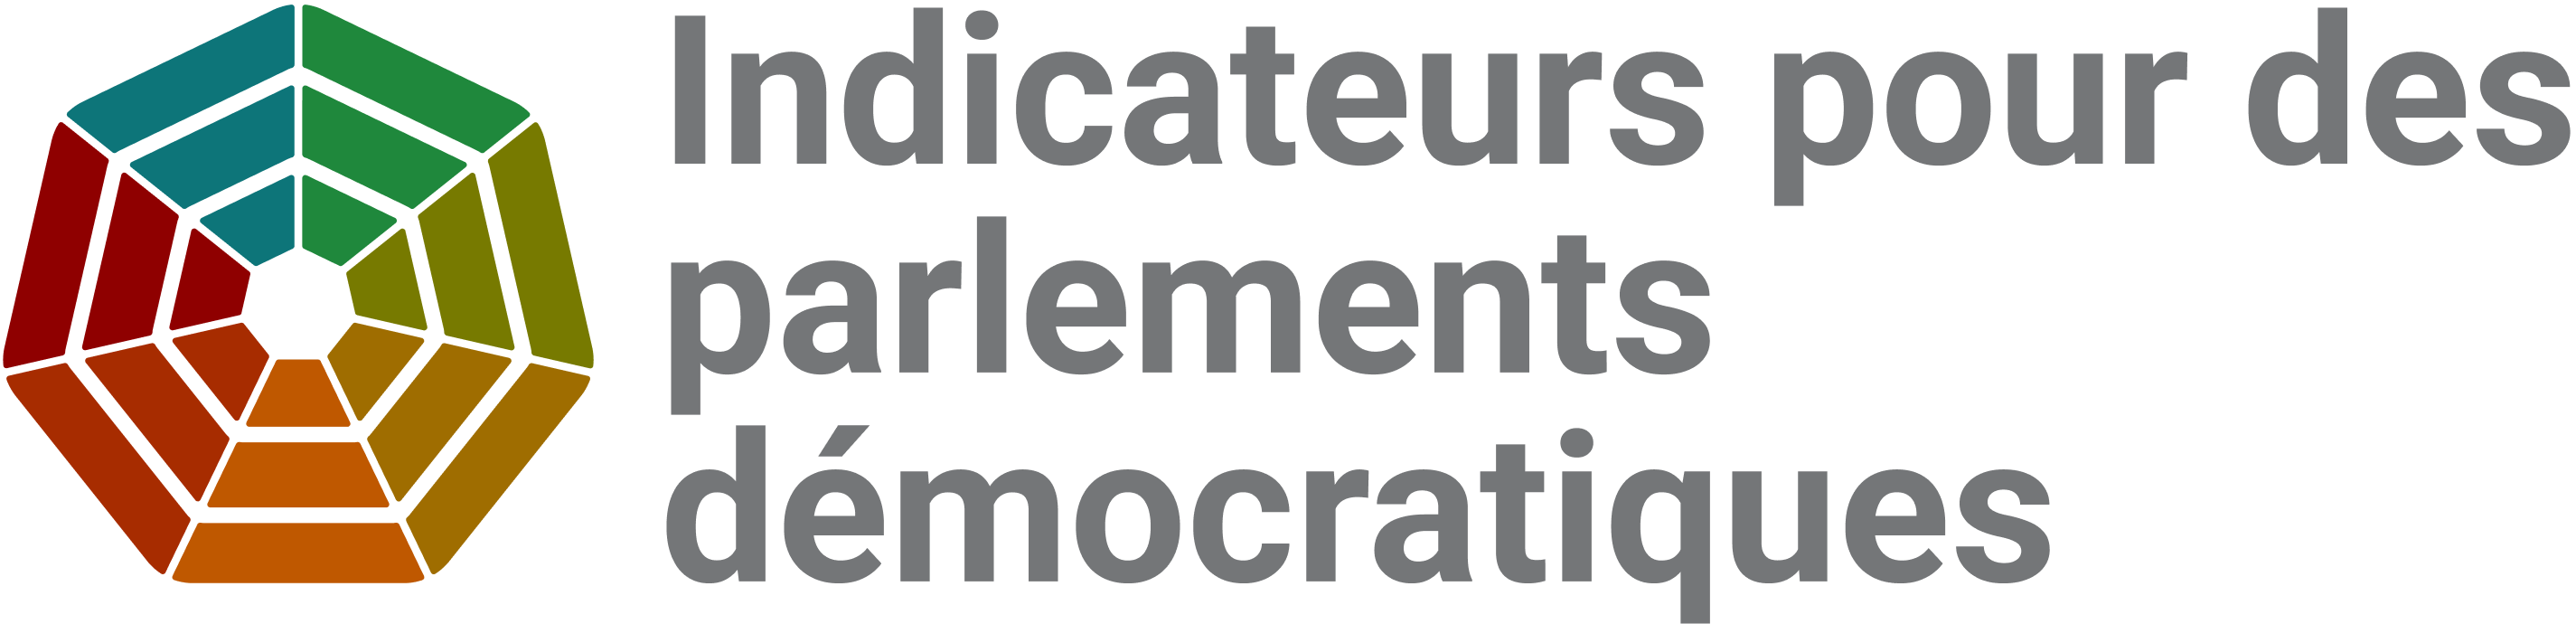 Launch of the Indicators for Democratic Parliaments